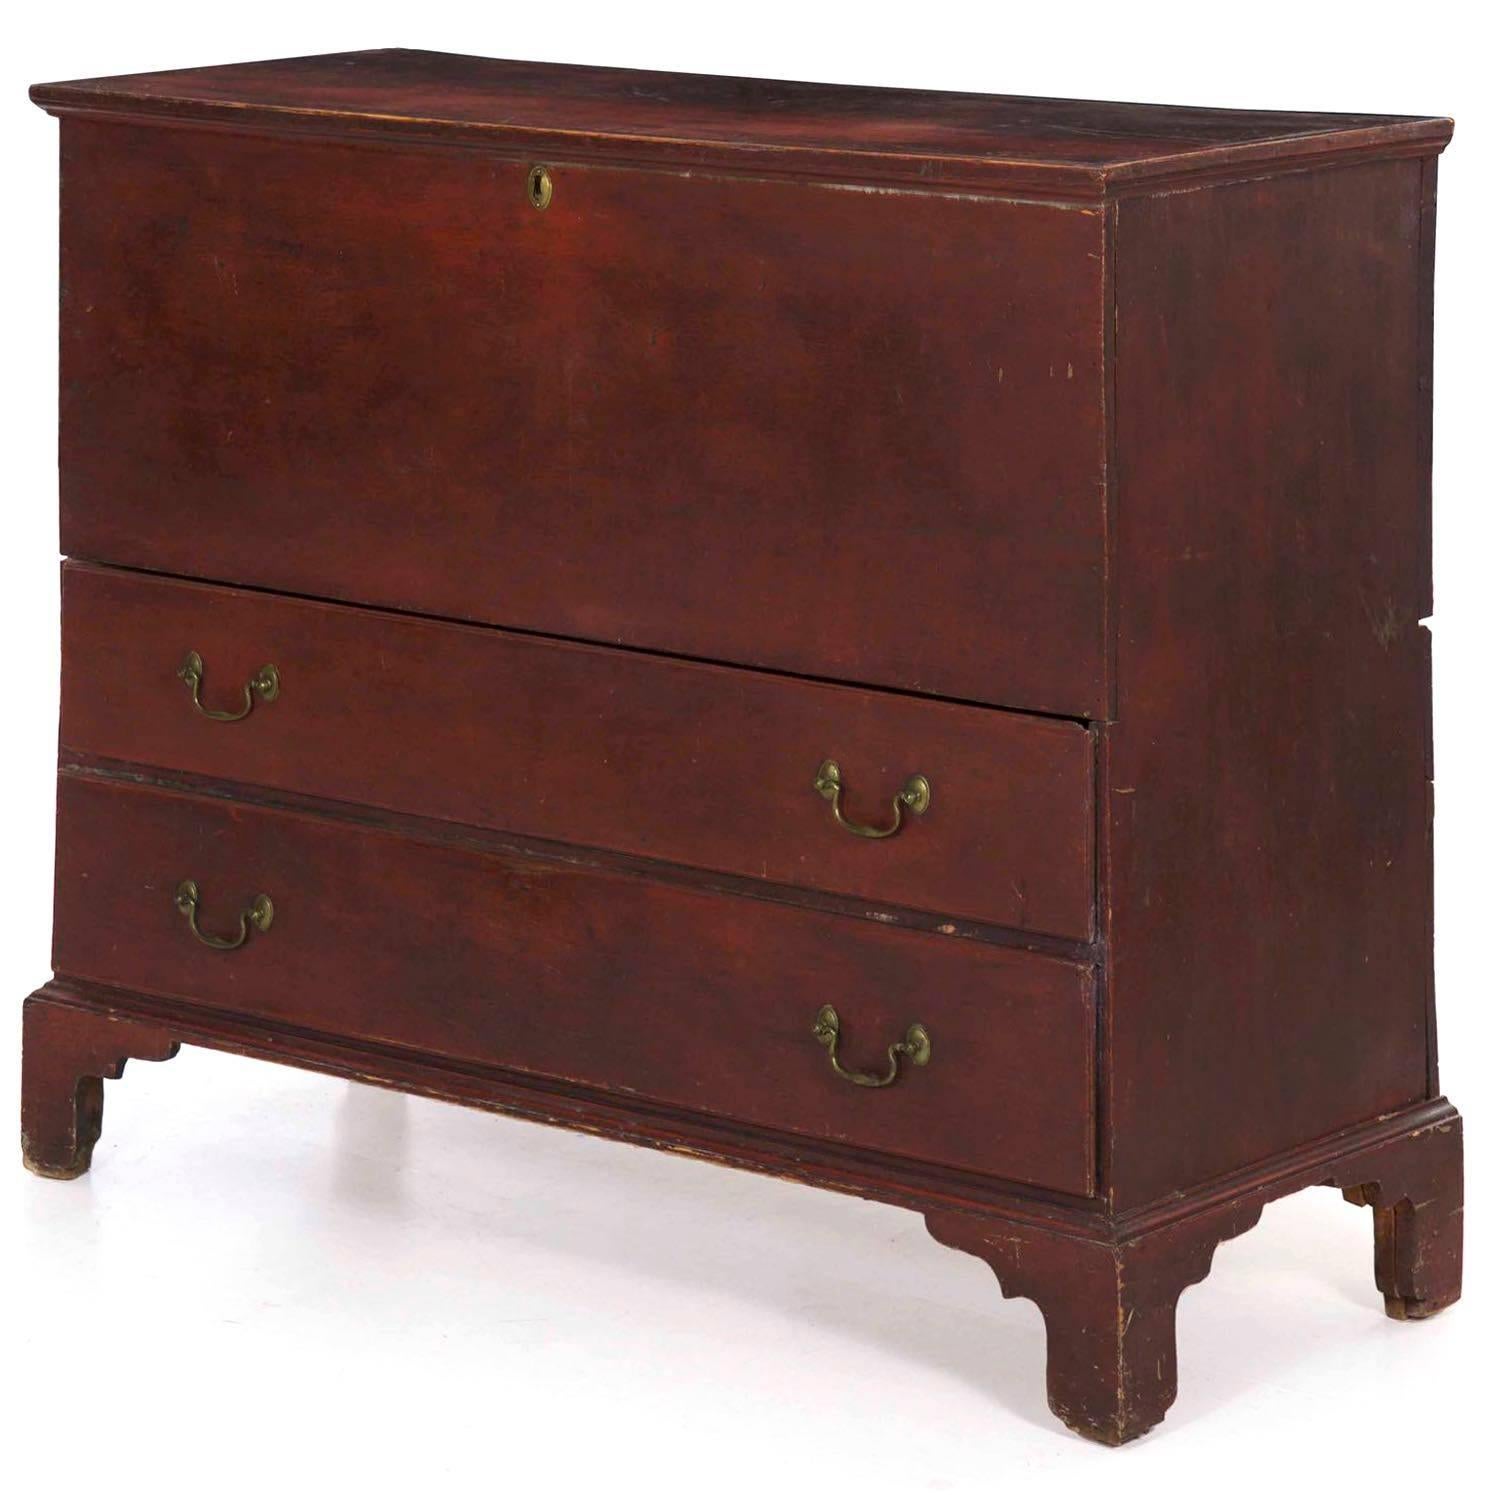 Retaining an old and almost certainly original red painted surface, this very striking mule chest of drawers is austere and primitive in form. The top lifts over large iron hinges to reveal a blanket storage chest over a pair of full width drawers